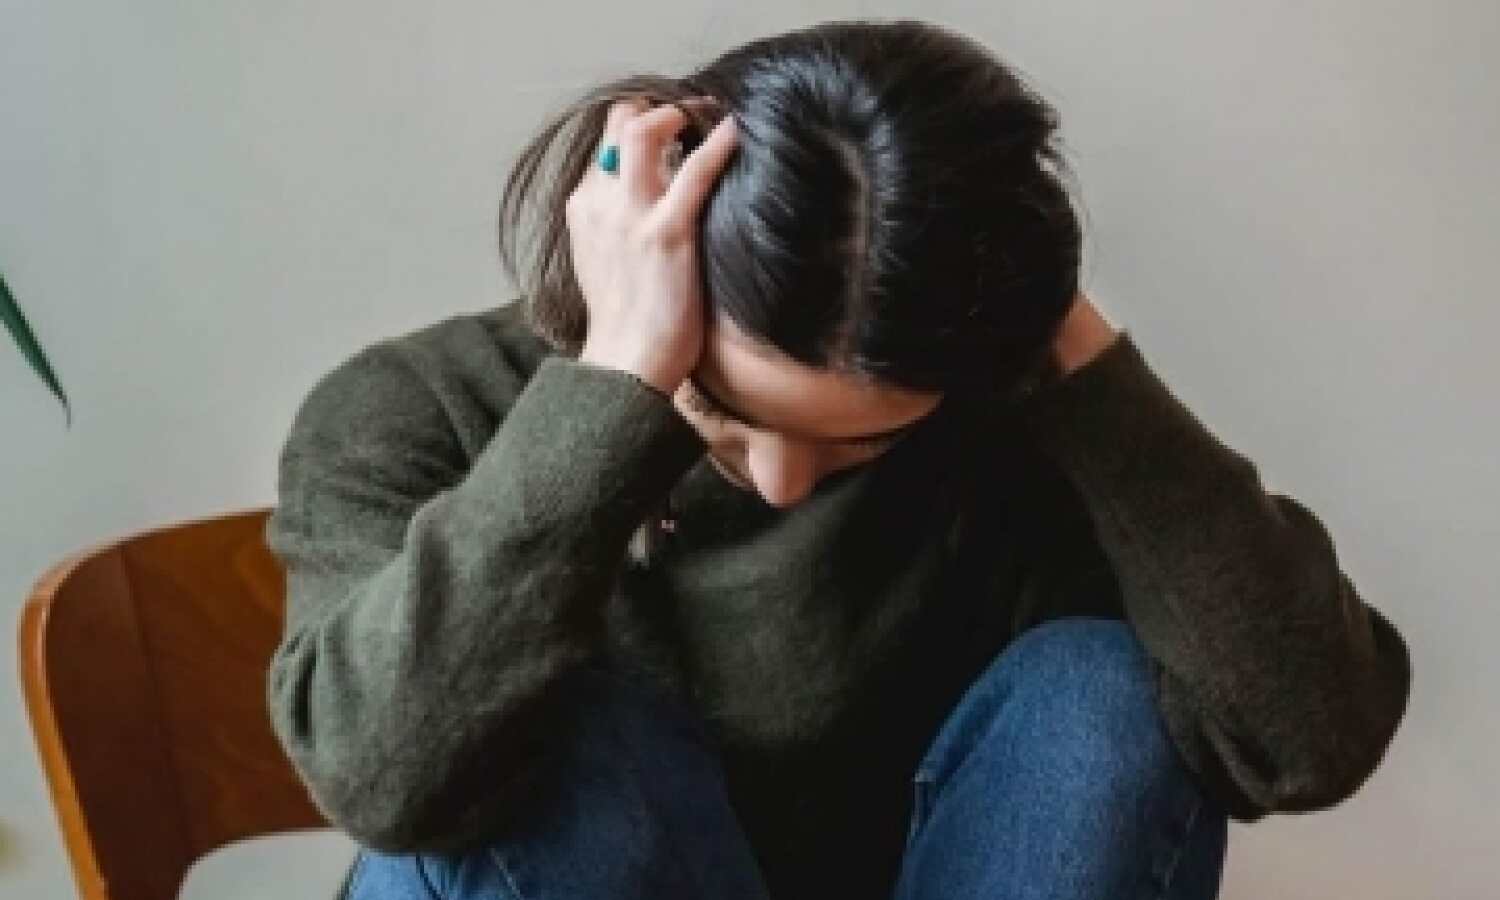 Anxiety post cardiac arrest more common in women than men: Study